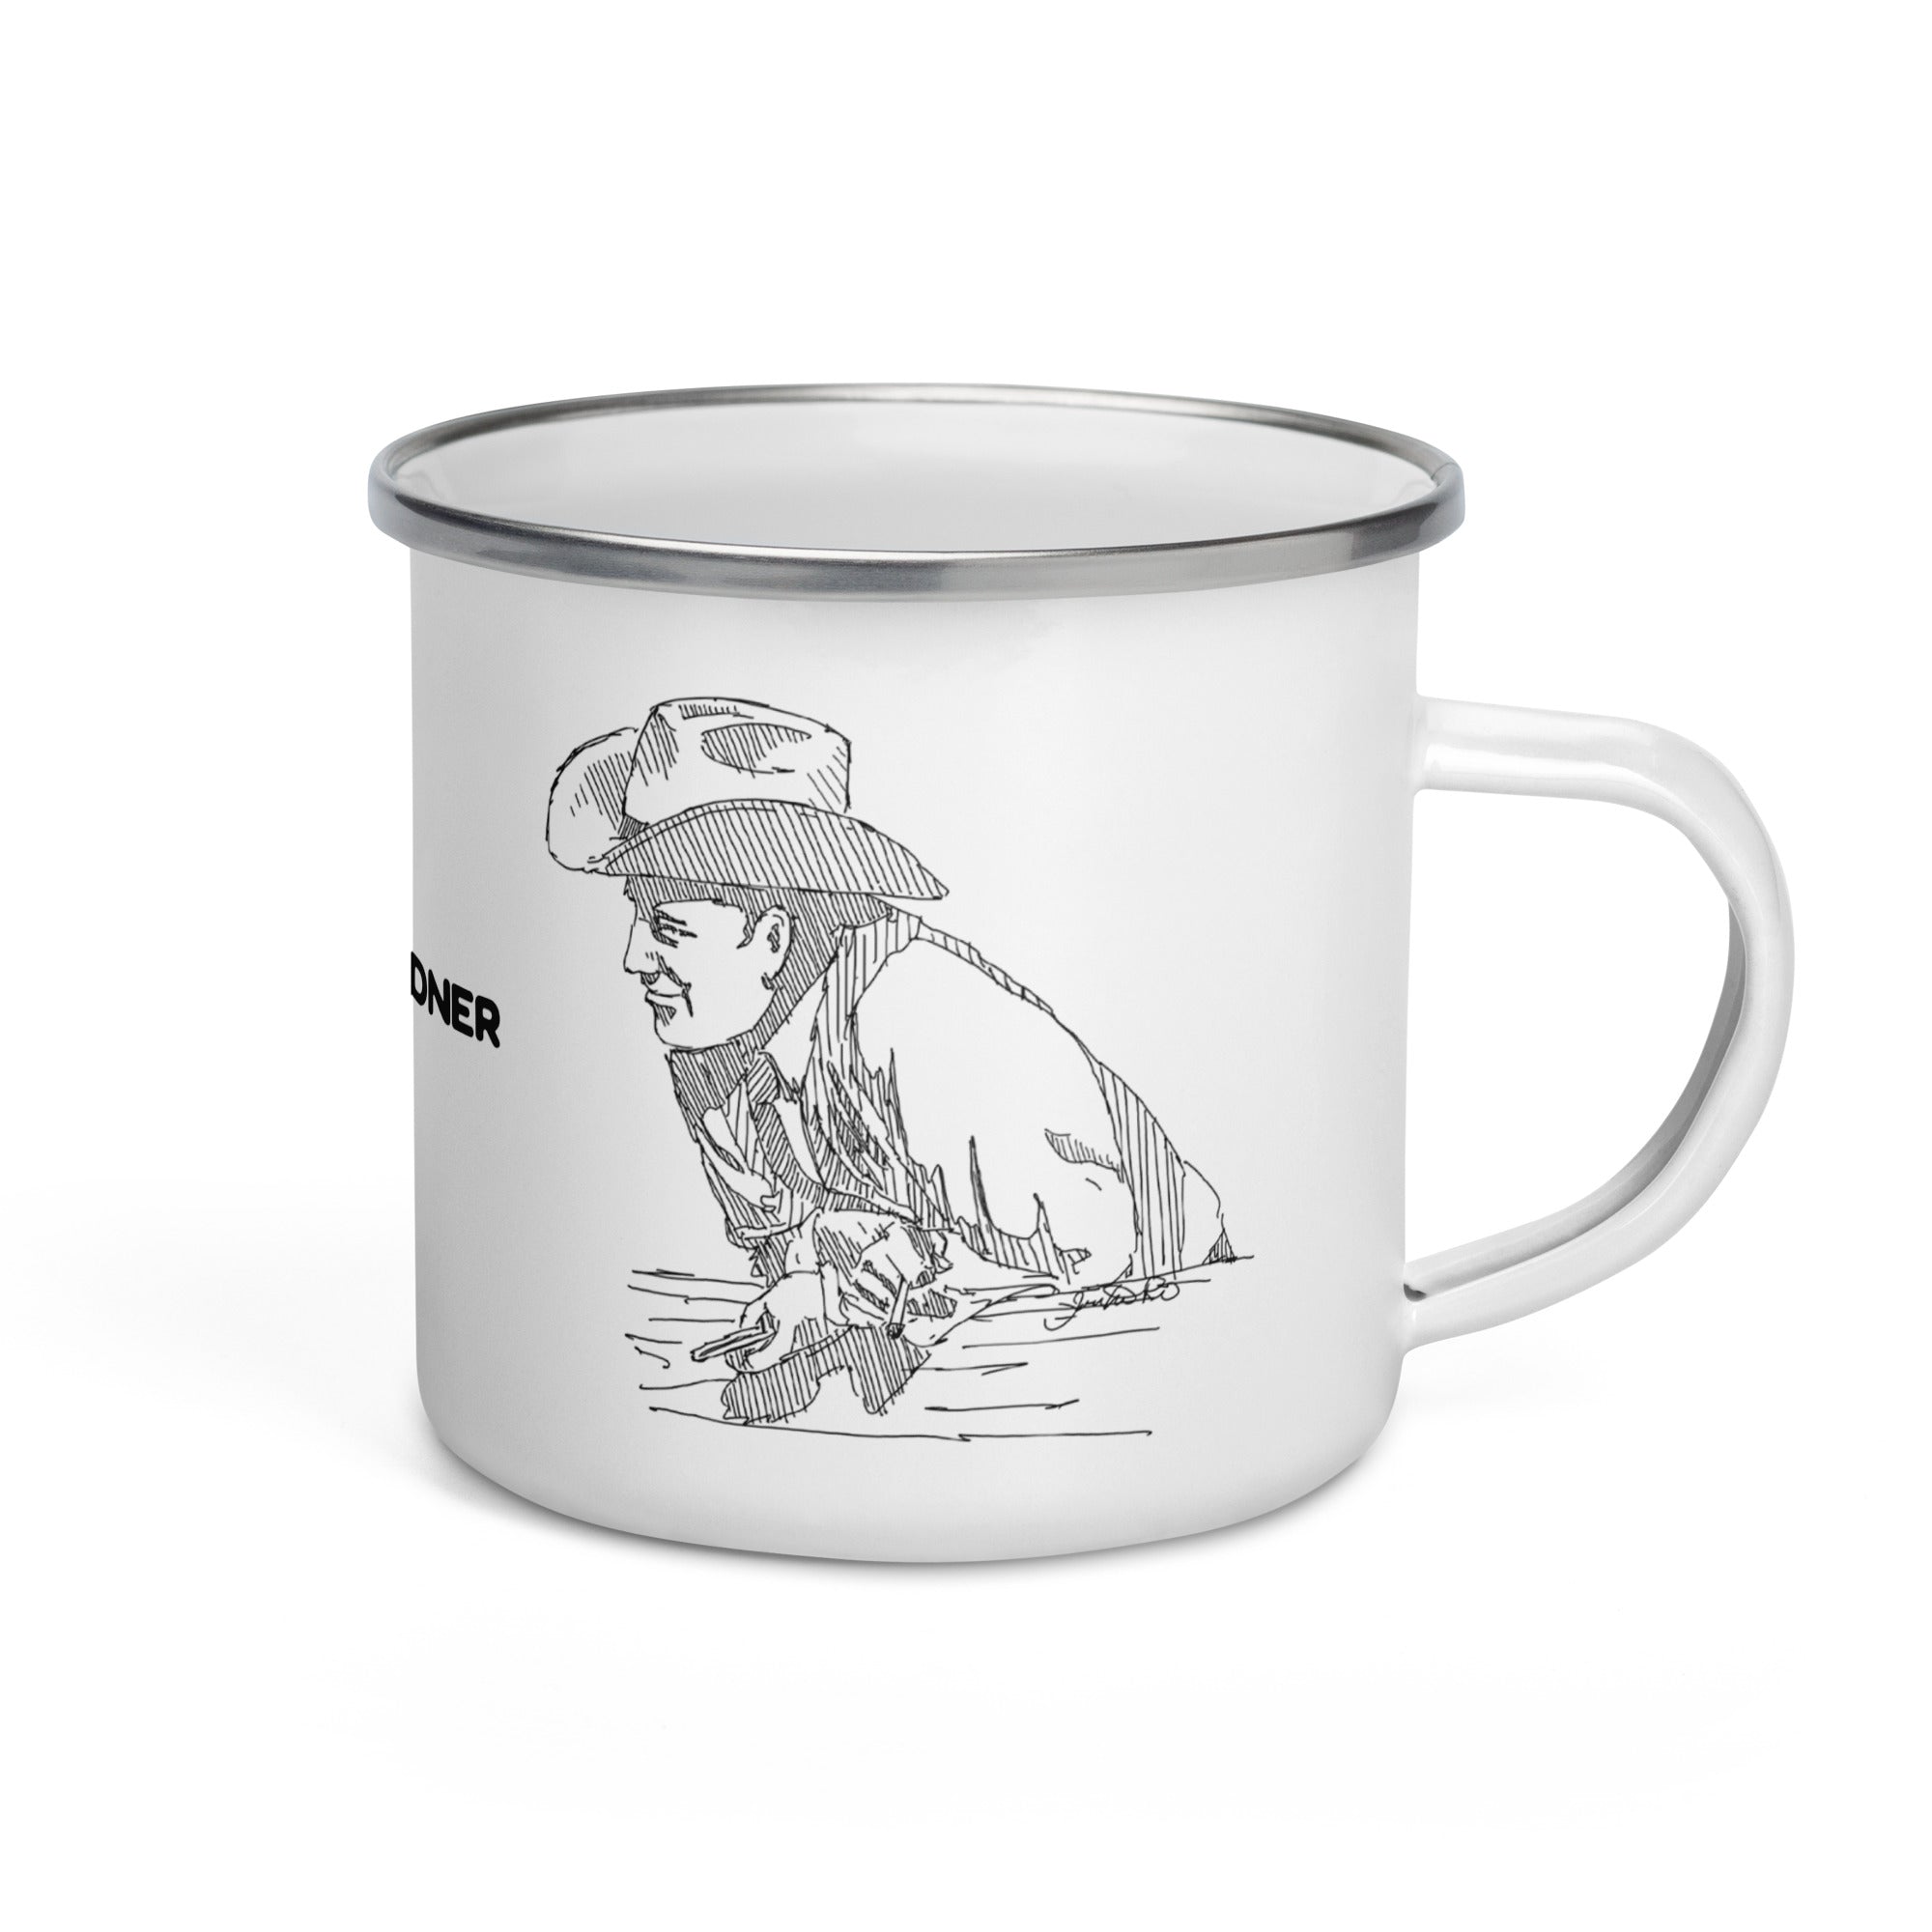 Enamel covered metal camp mug with a sketch of a Cowboy leaning on a fence on two sides and the phrase “Morning Pardner” in the middle. 12 oz capacity.